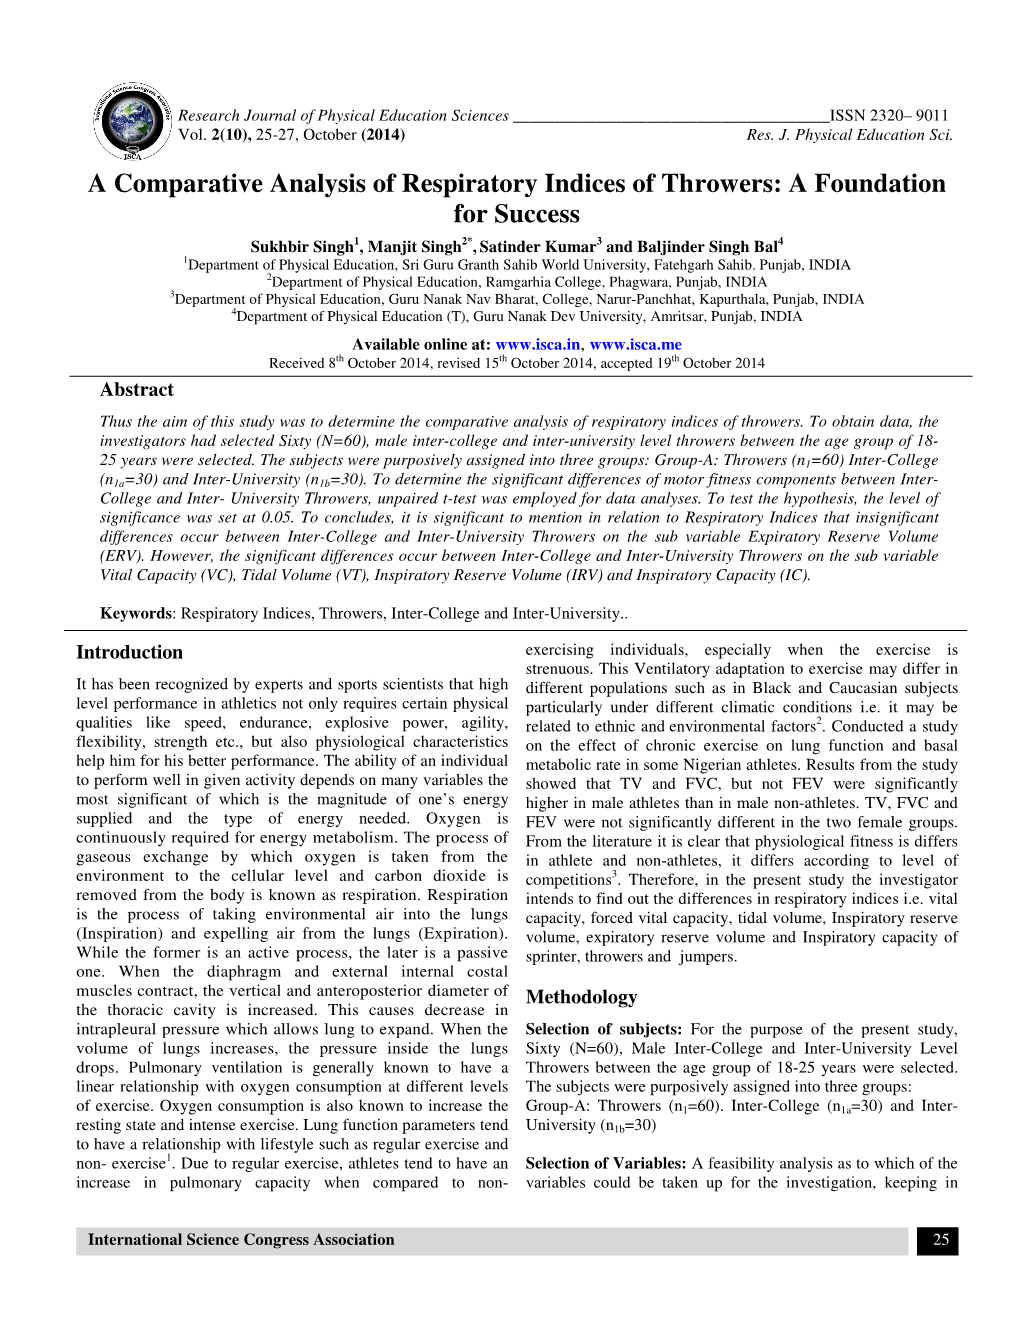 A Comparative Analysis of Respiratory Indices of Throwers: a Foundation